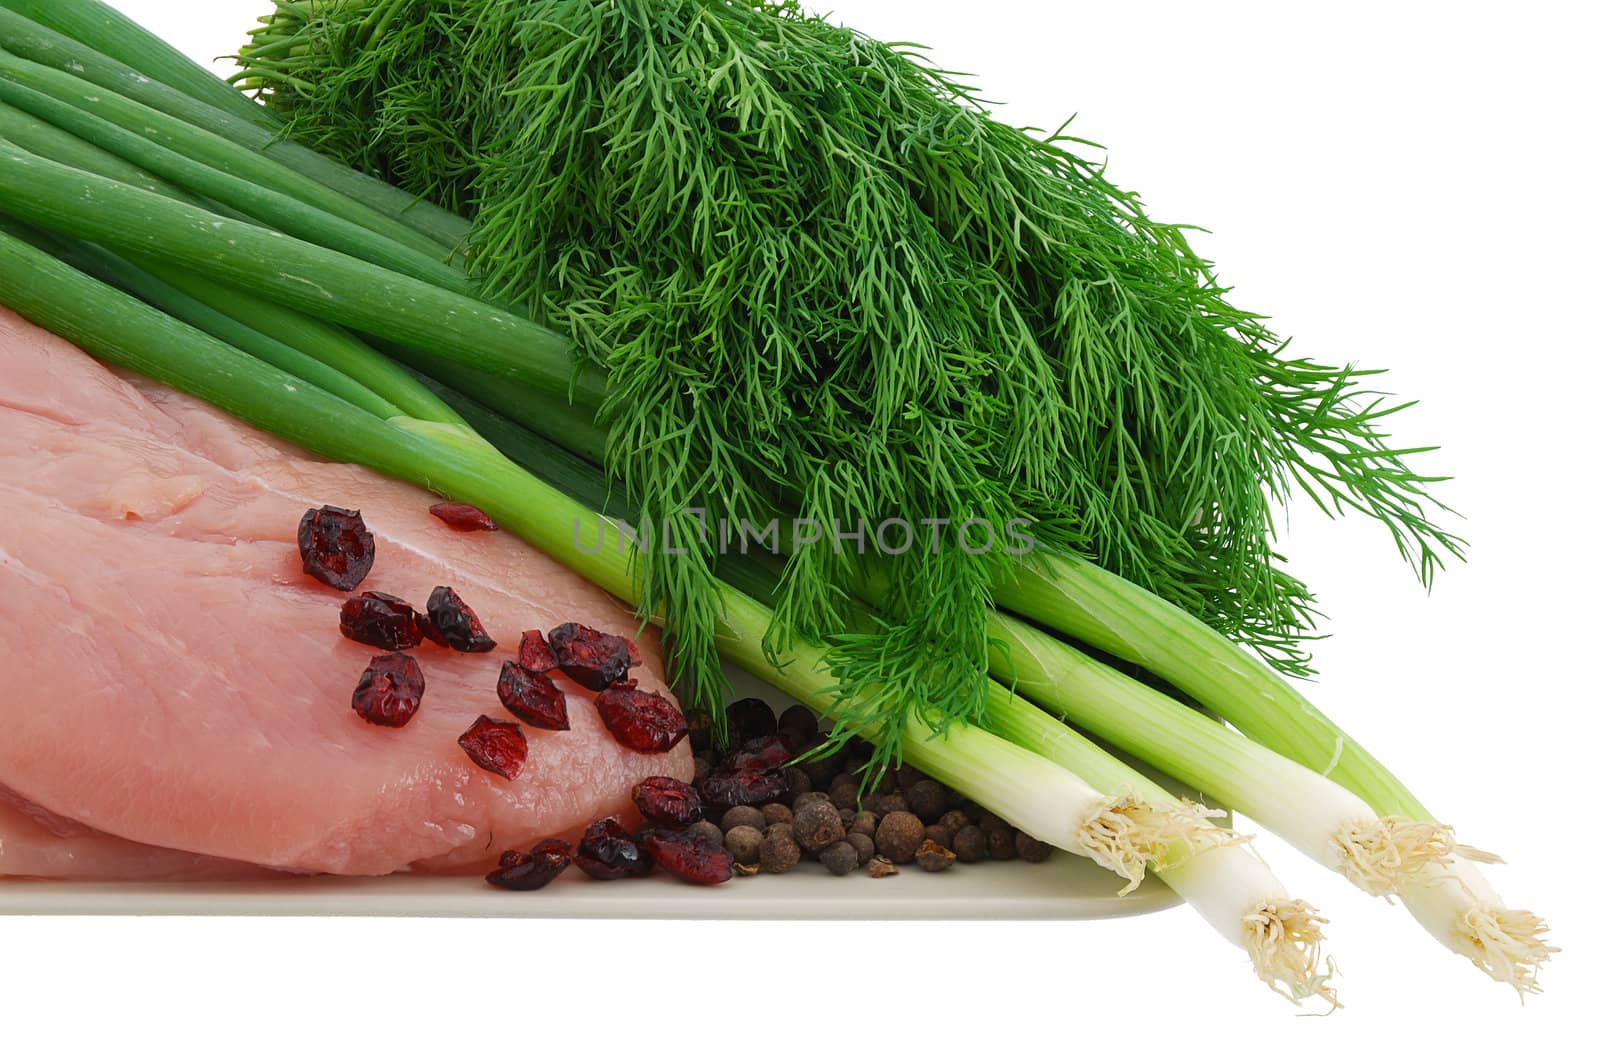 Raw turkey breast with green vegetables and cranberries on plate by vadidak